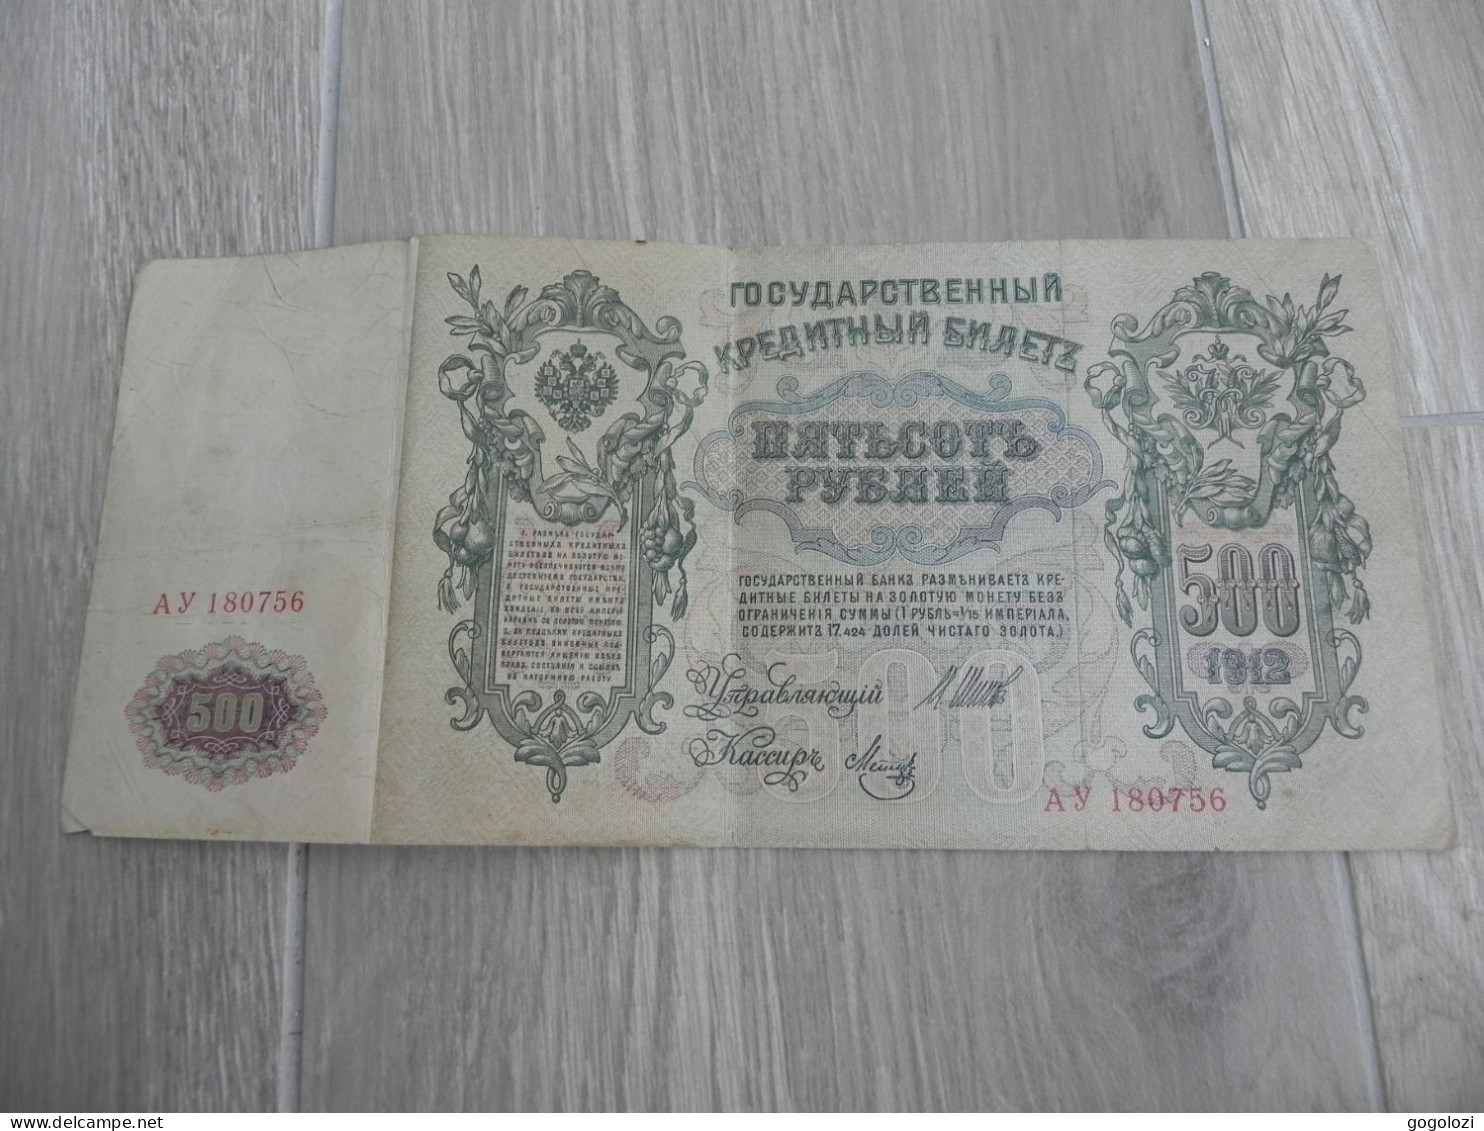 Russia 500 Roubles 1912 - Russie